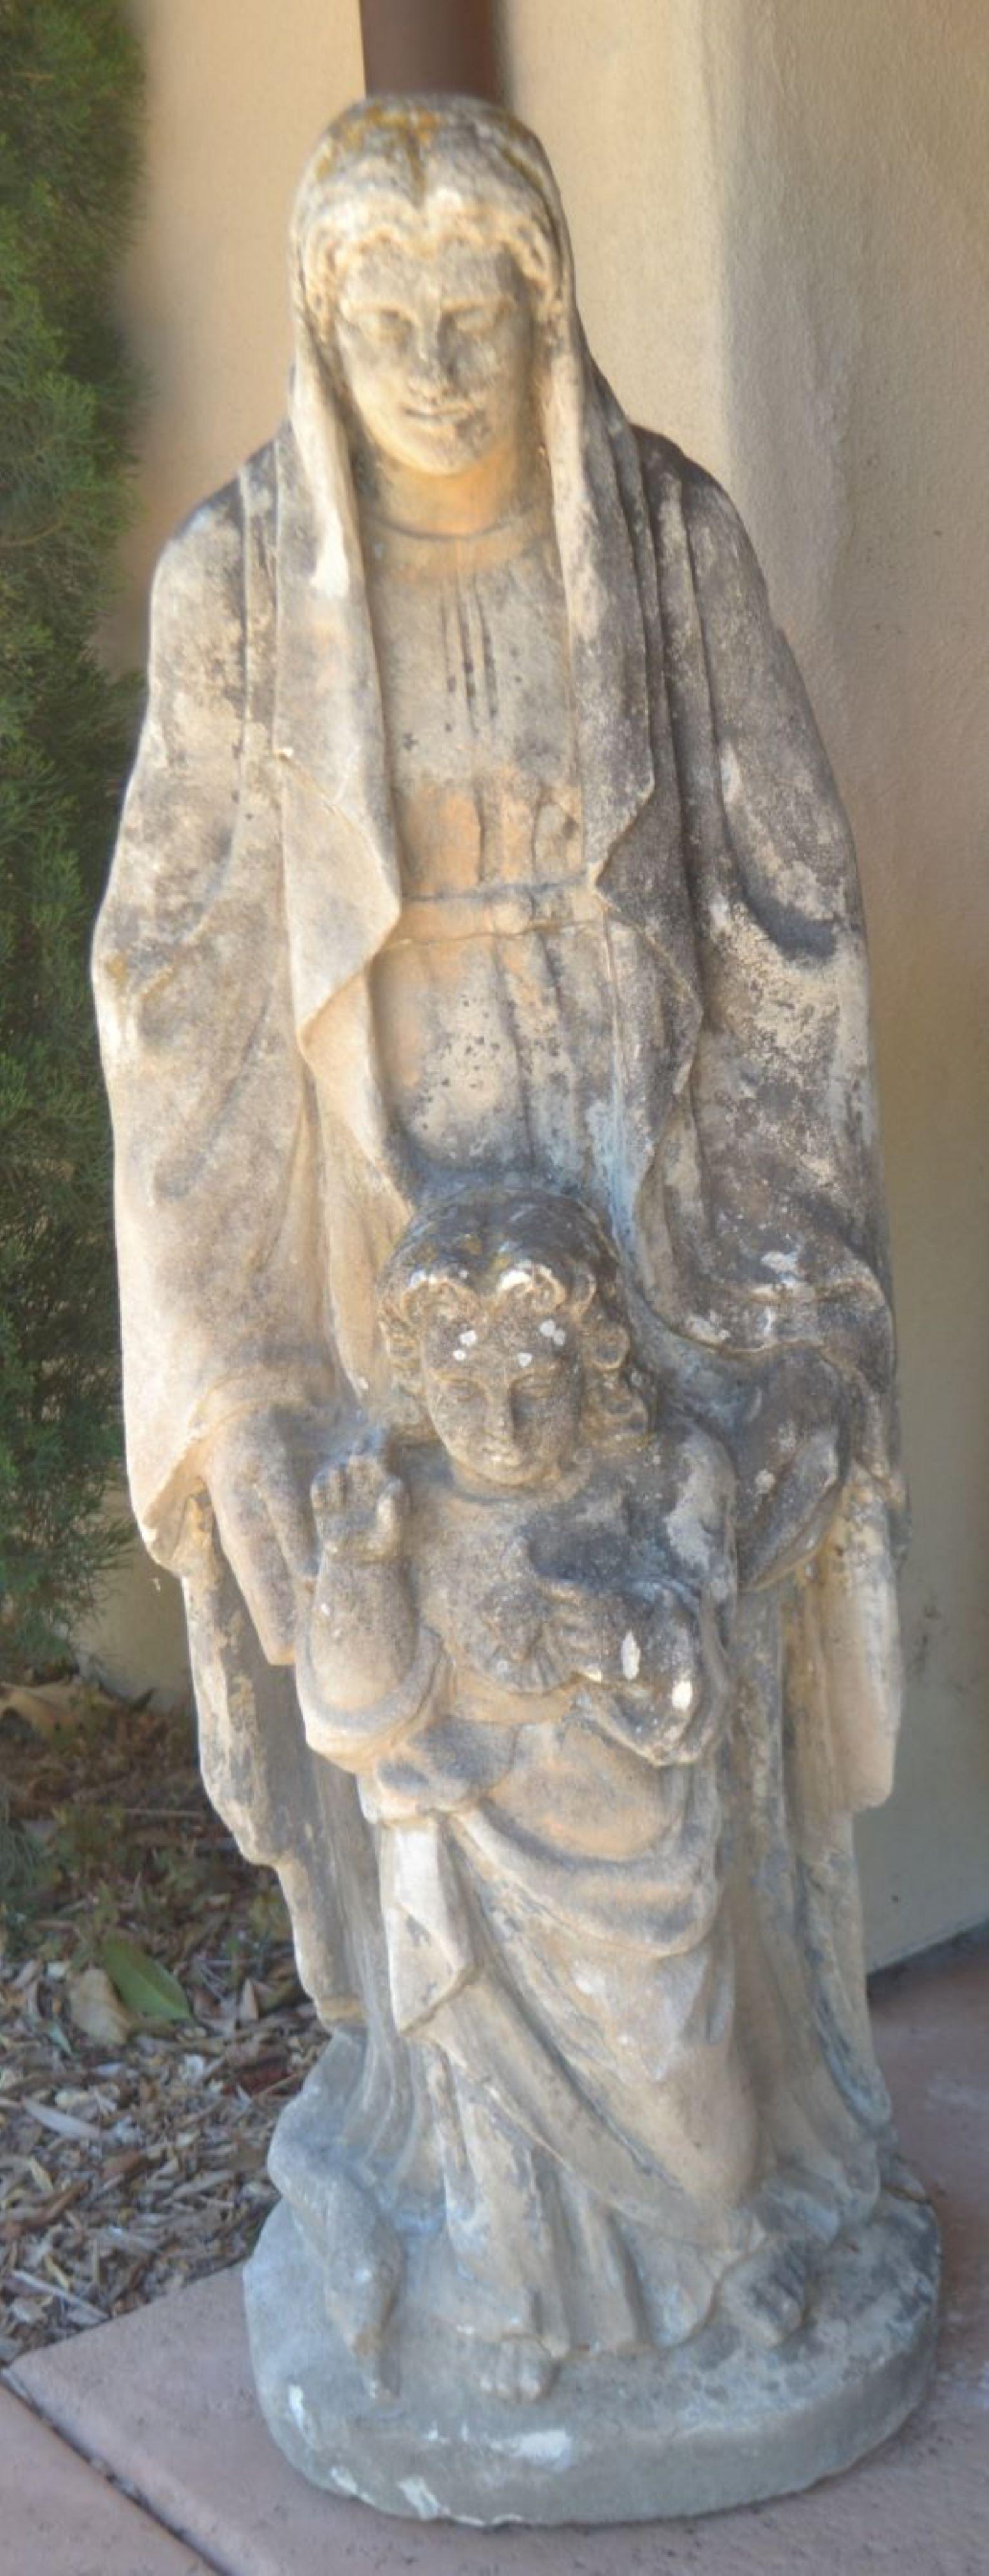 Carved stone statue of Saint Anne and child Mary.